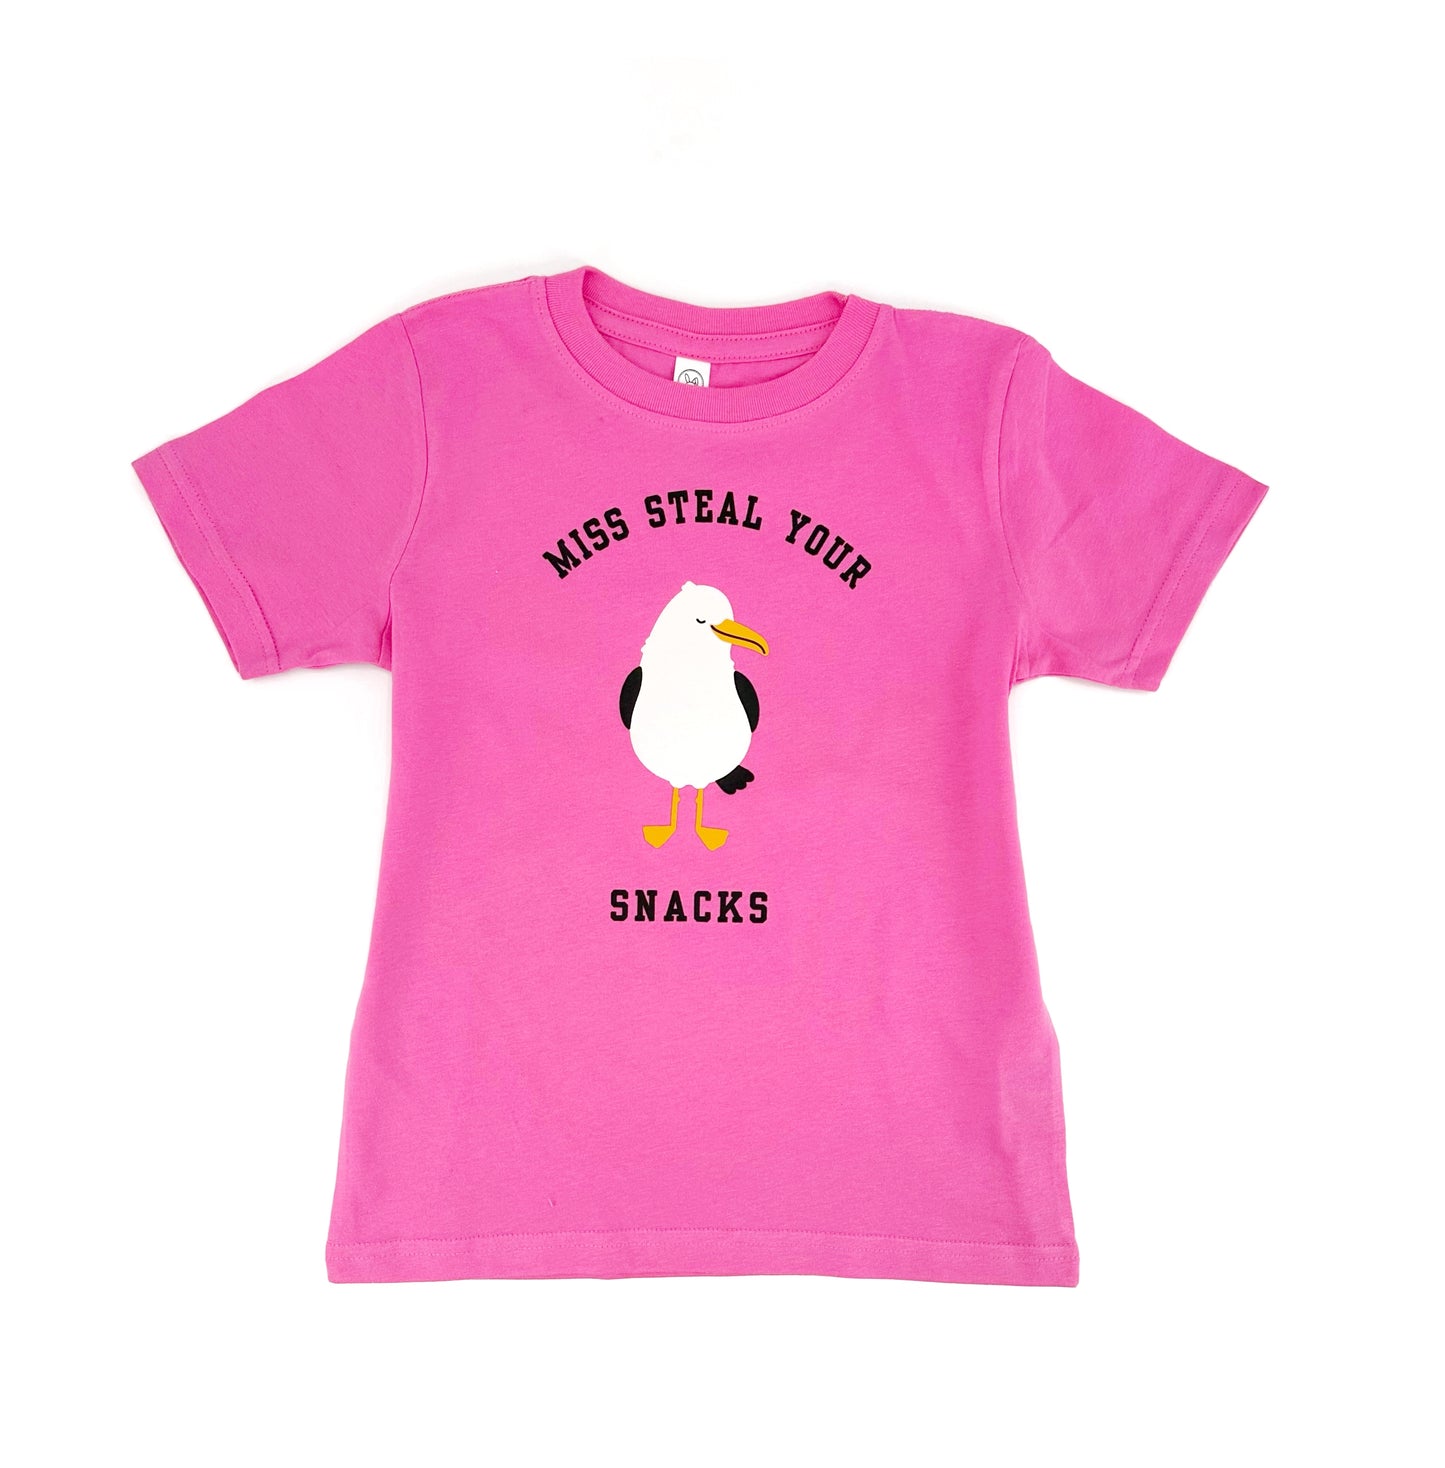 MISS steal your snacks / hot pink tee